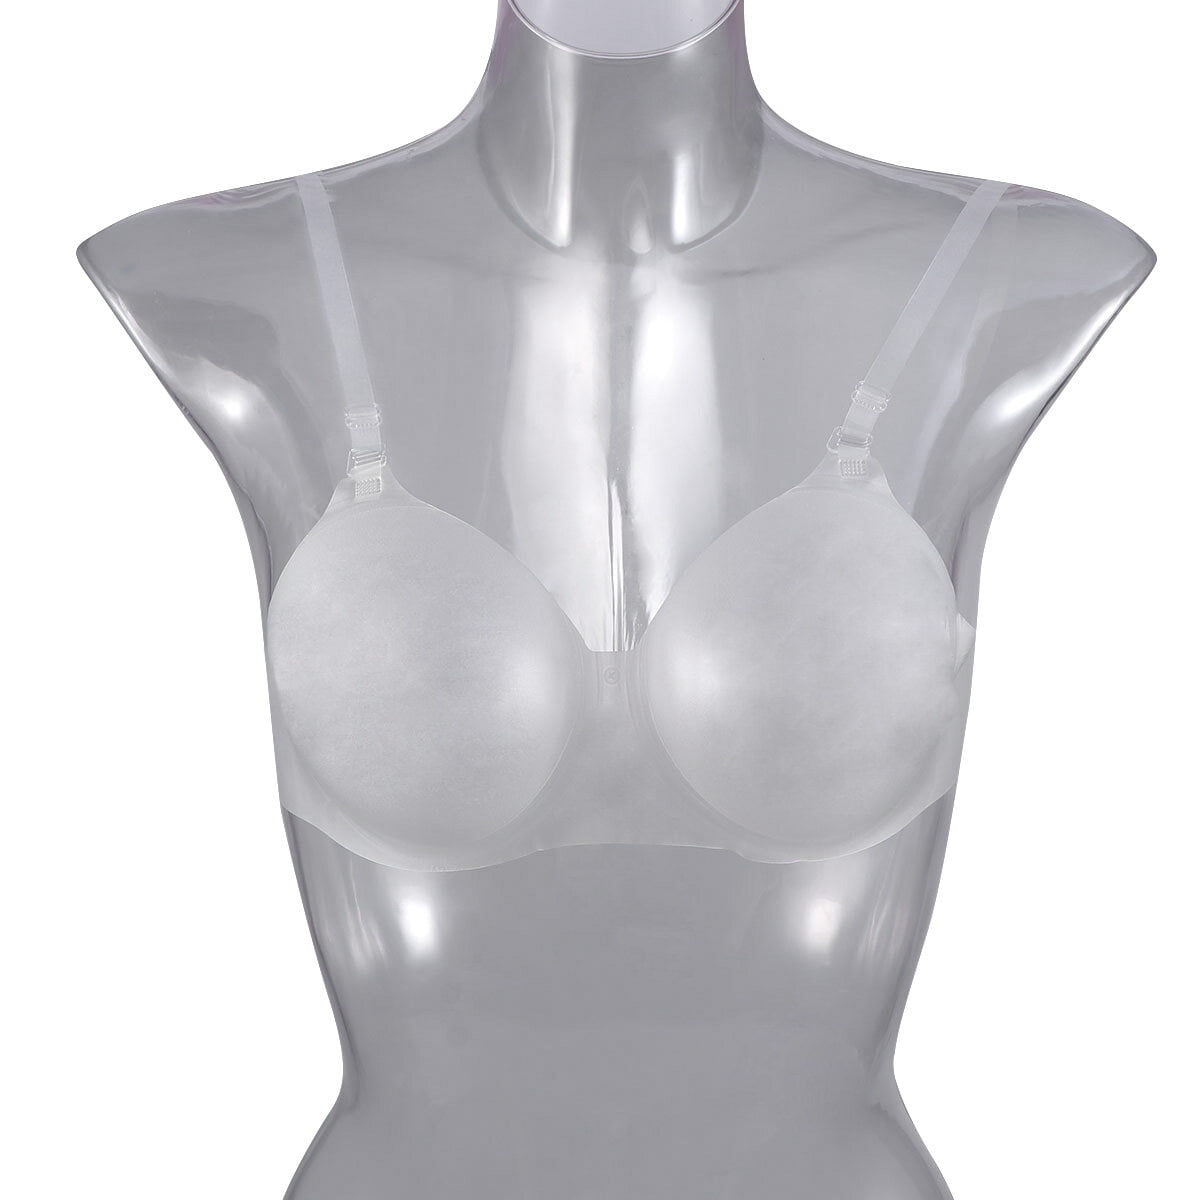 Comfortable and Breathable Ultrathin NuBra Invisible and Traceless Gathered  Transparent Nude Bra